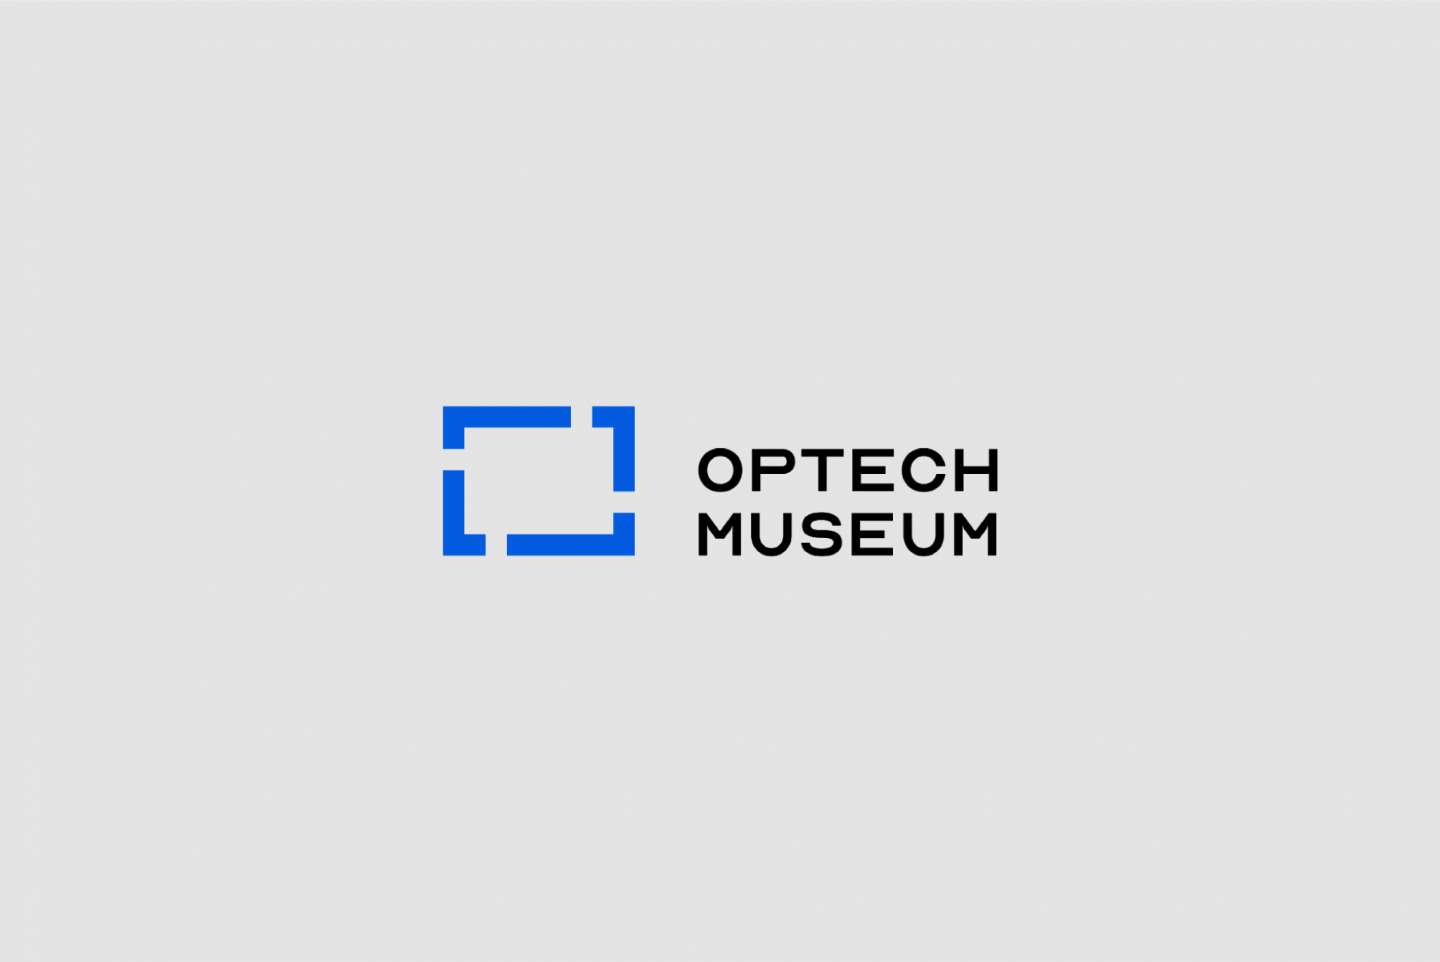 Optech Museum